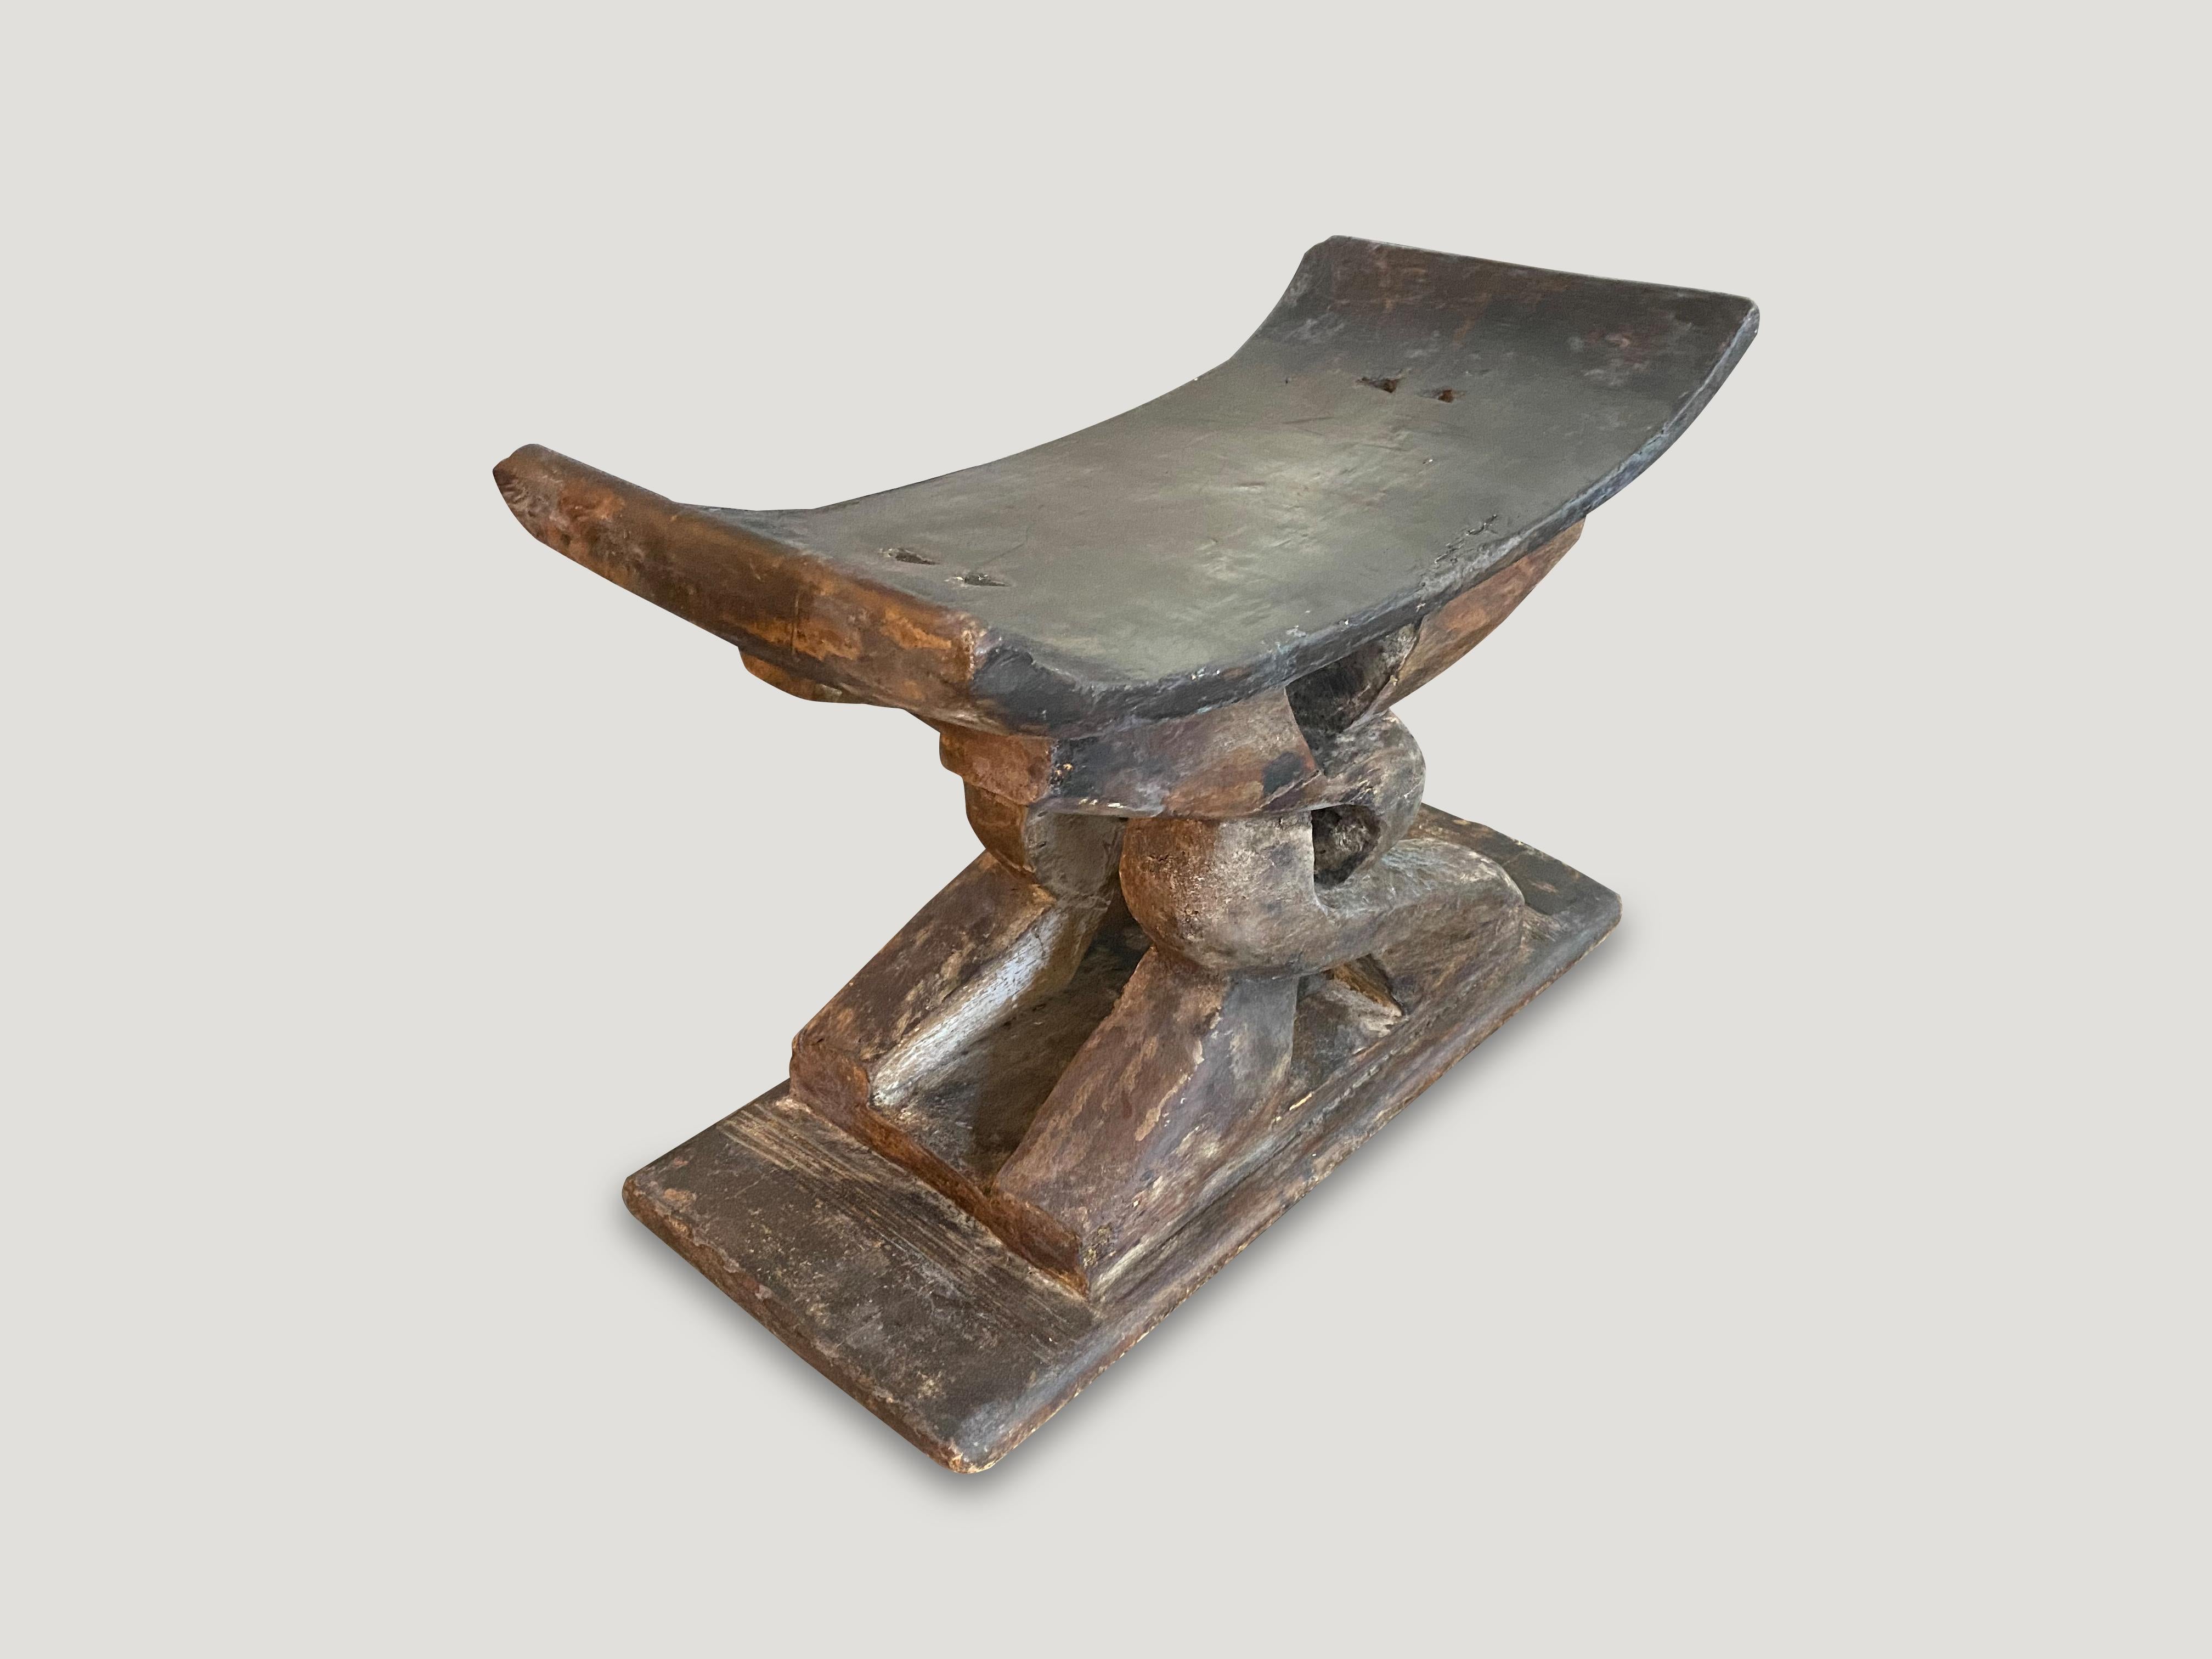 Lovely patina on this antique bench or stool hand carved from a single piece of wood from West Africa, early 20th century.

This bench was sourced in the spirit of wabi-sabi, a Japanese philosophy that beauty can be found in imperfection and